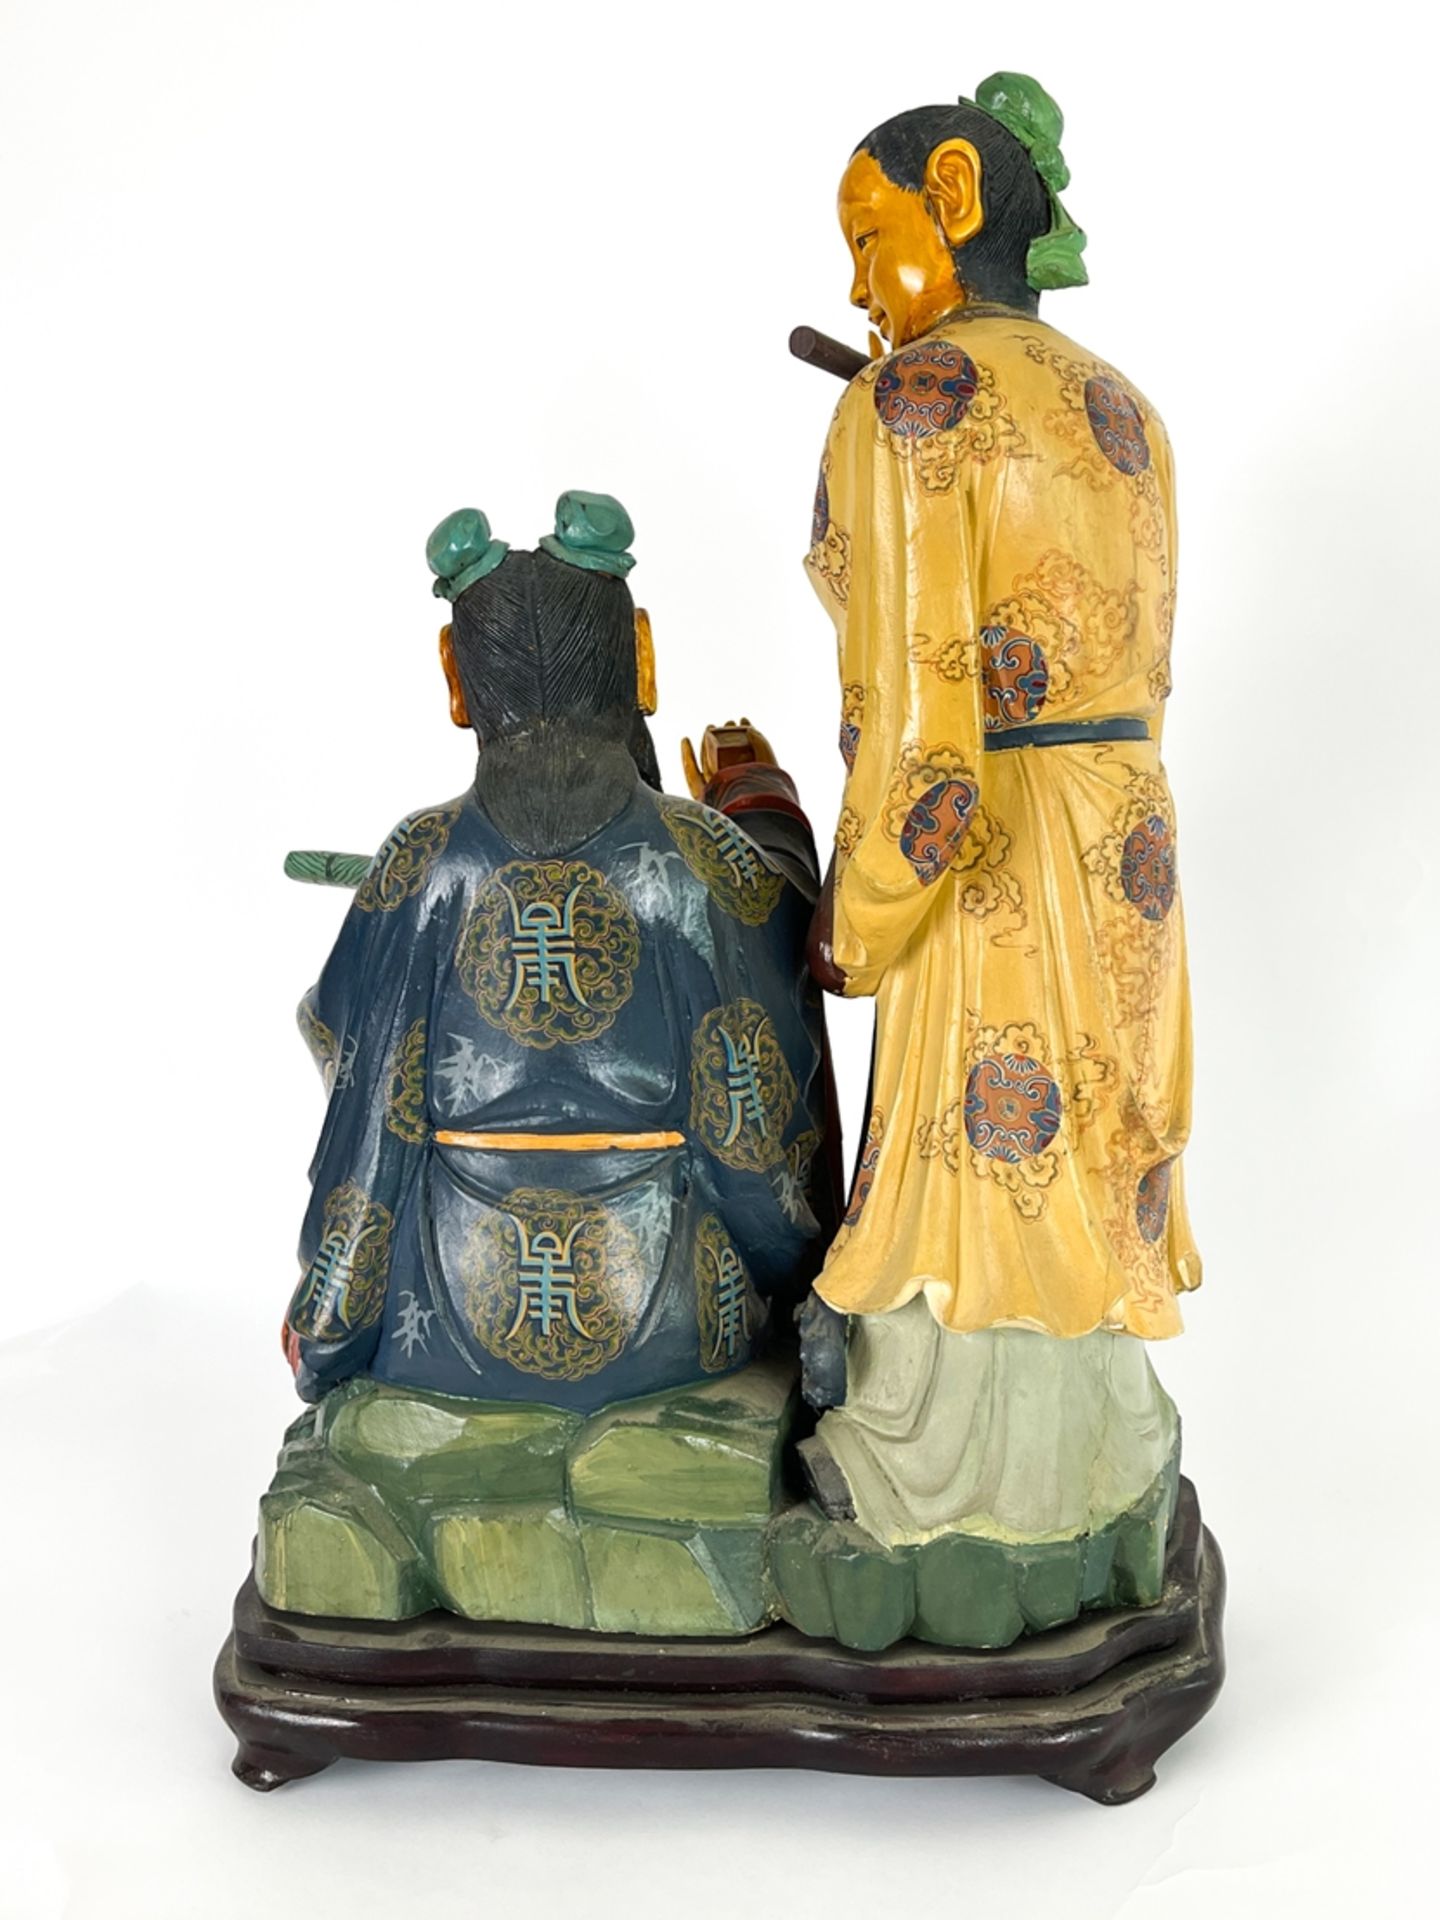 Chinese sculpture made from poplar wood and ivory - Image 9 of 13